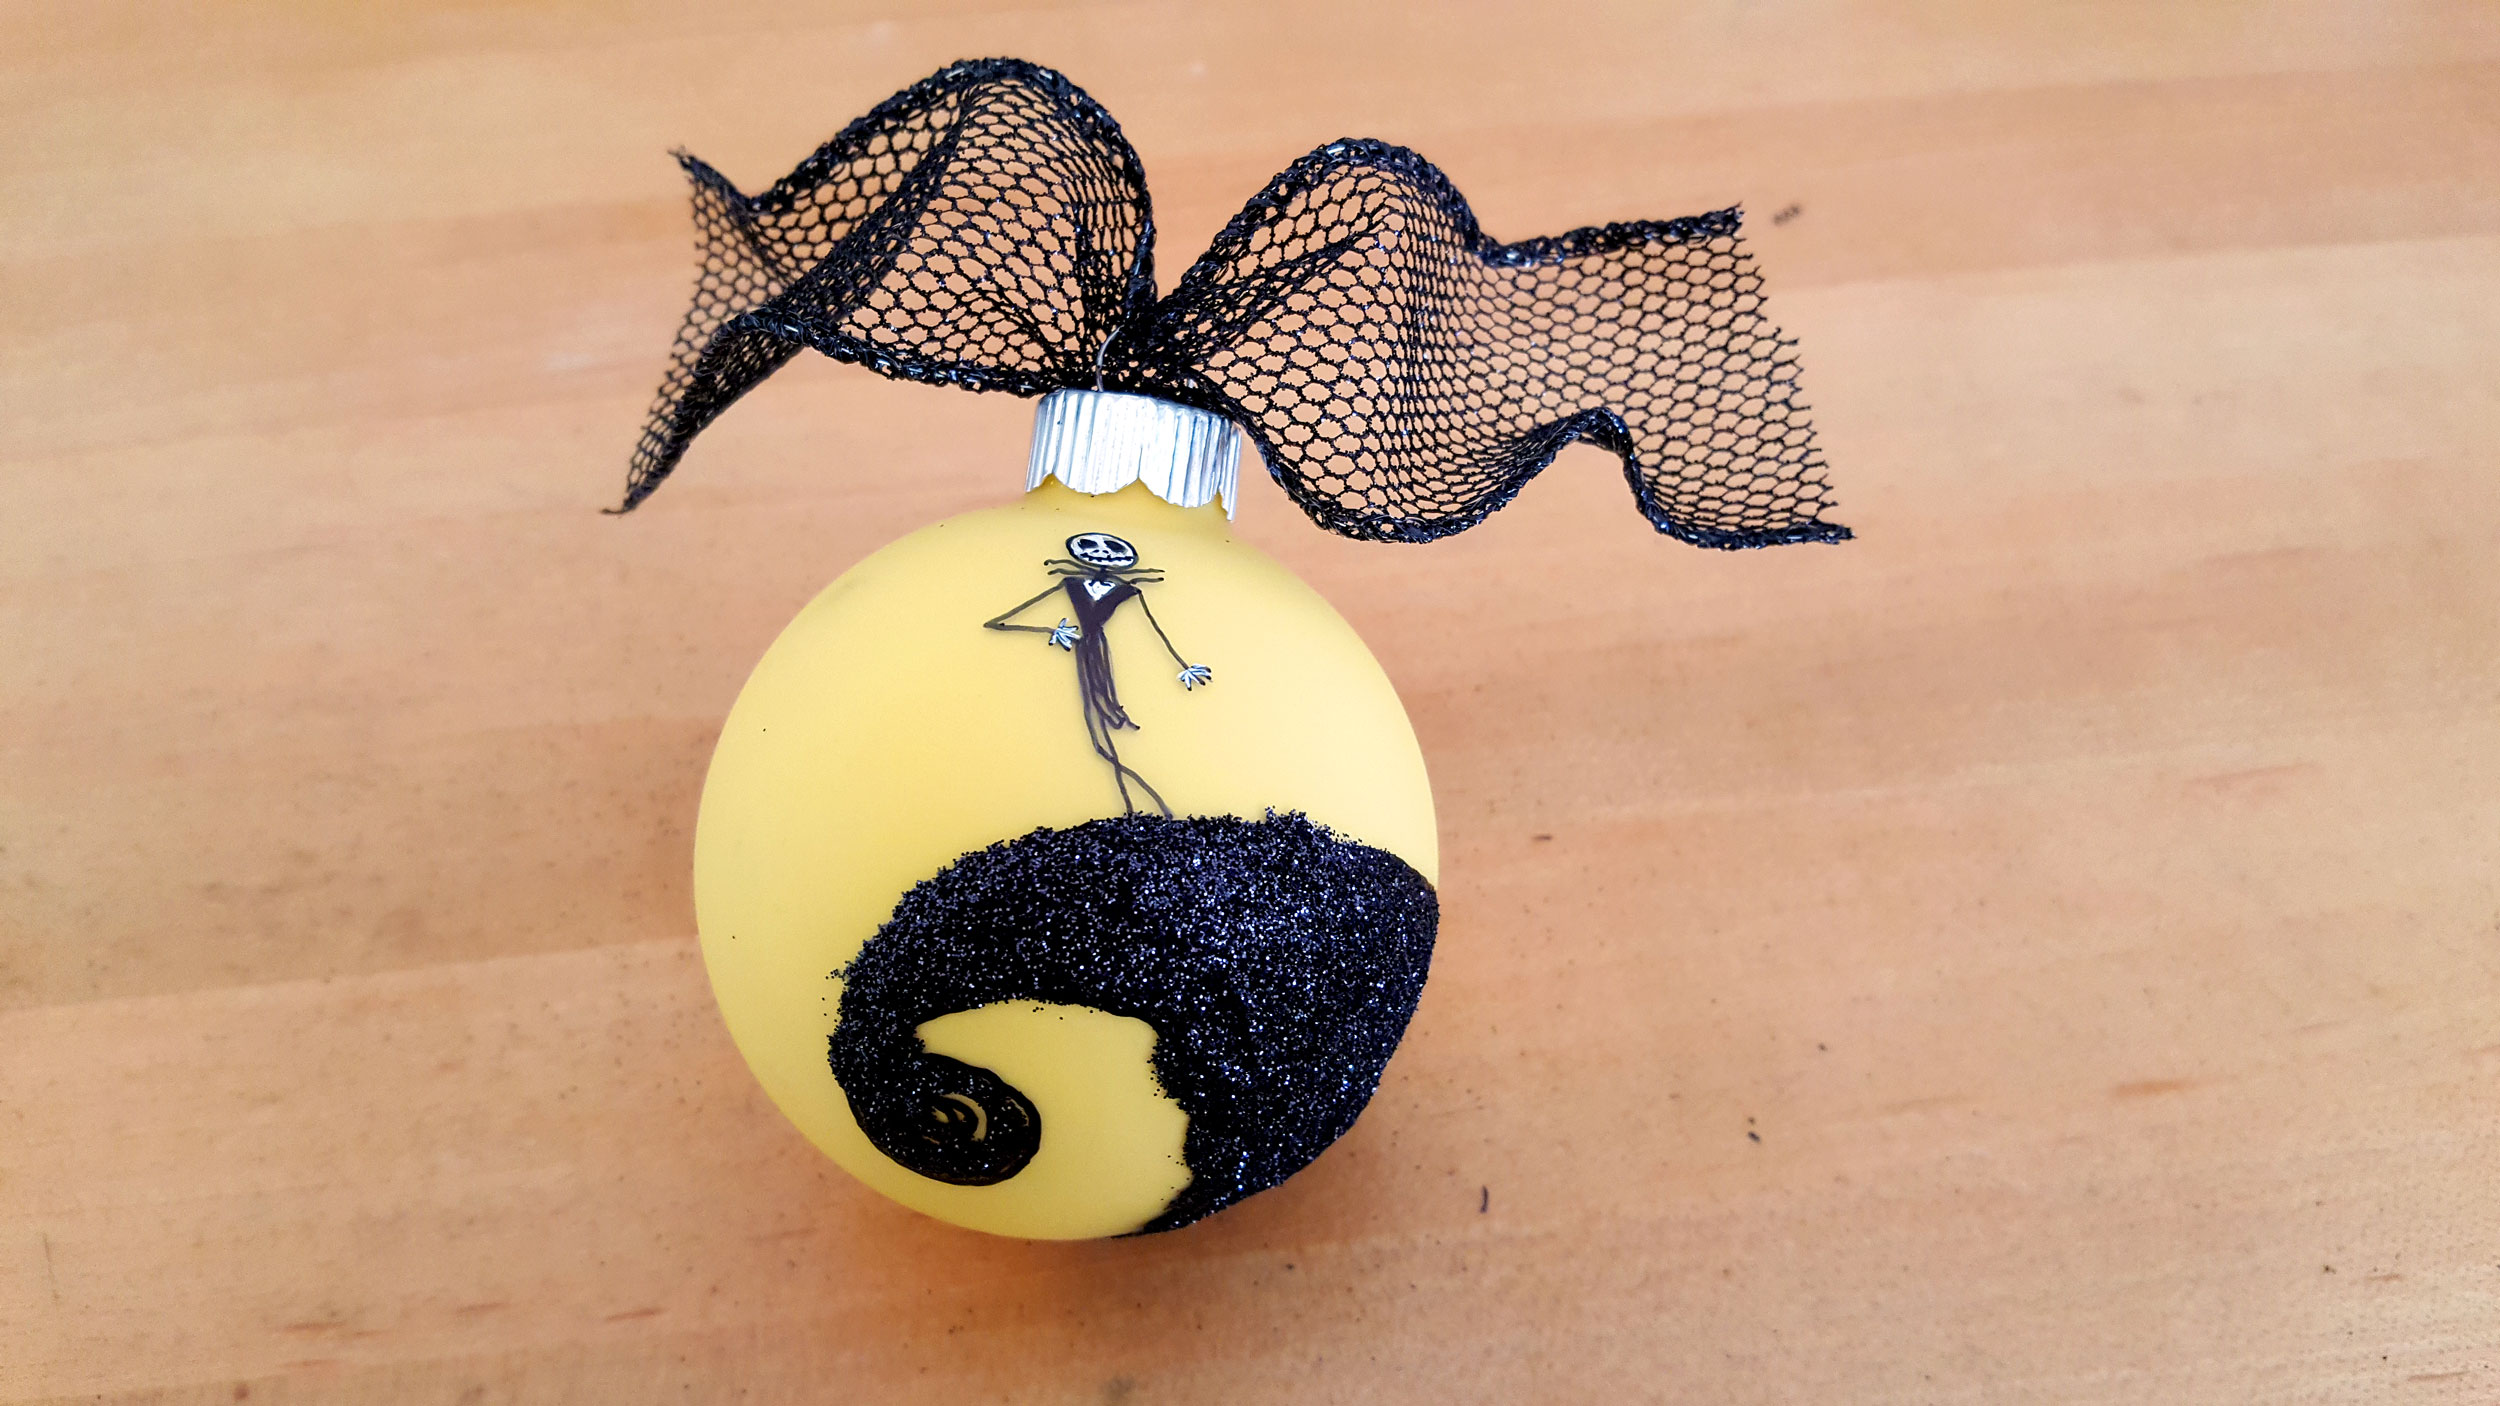 Nightmare Before Christmas Ornaments what the Jack Skellington finished product looks like | OrnamentShop.com